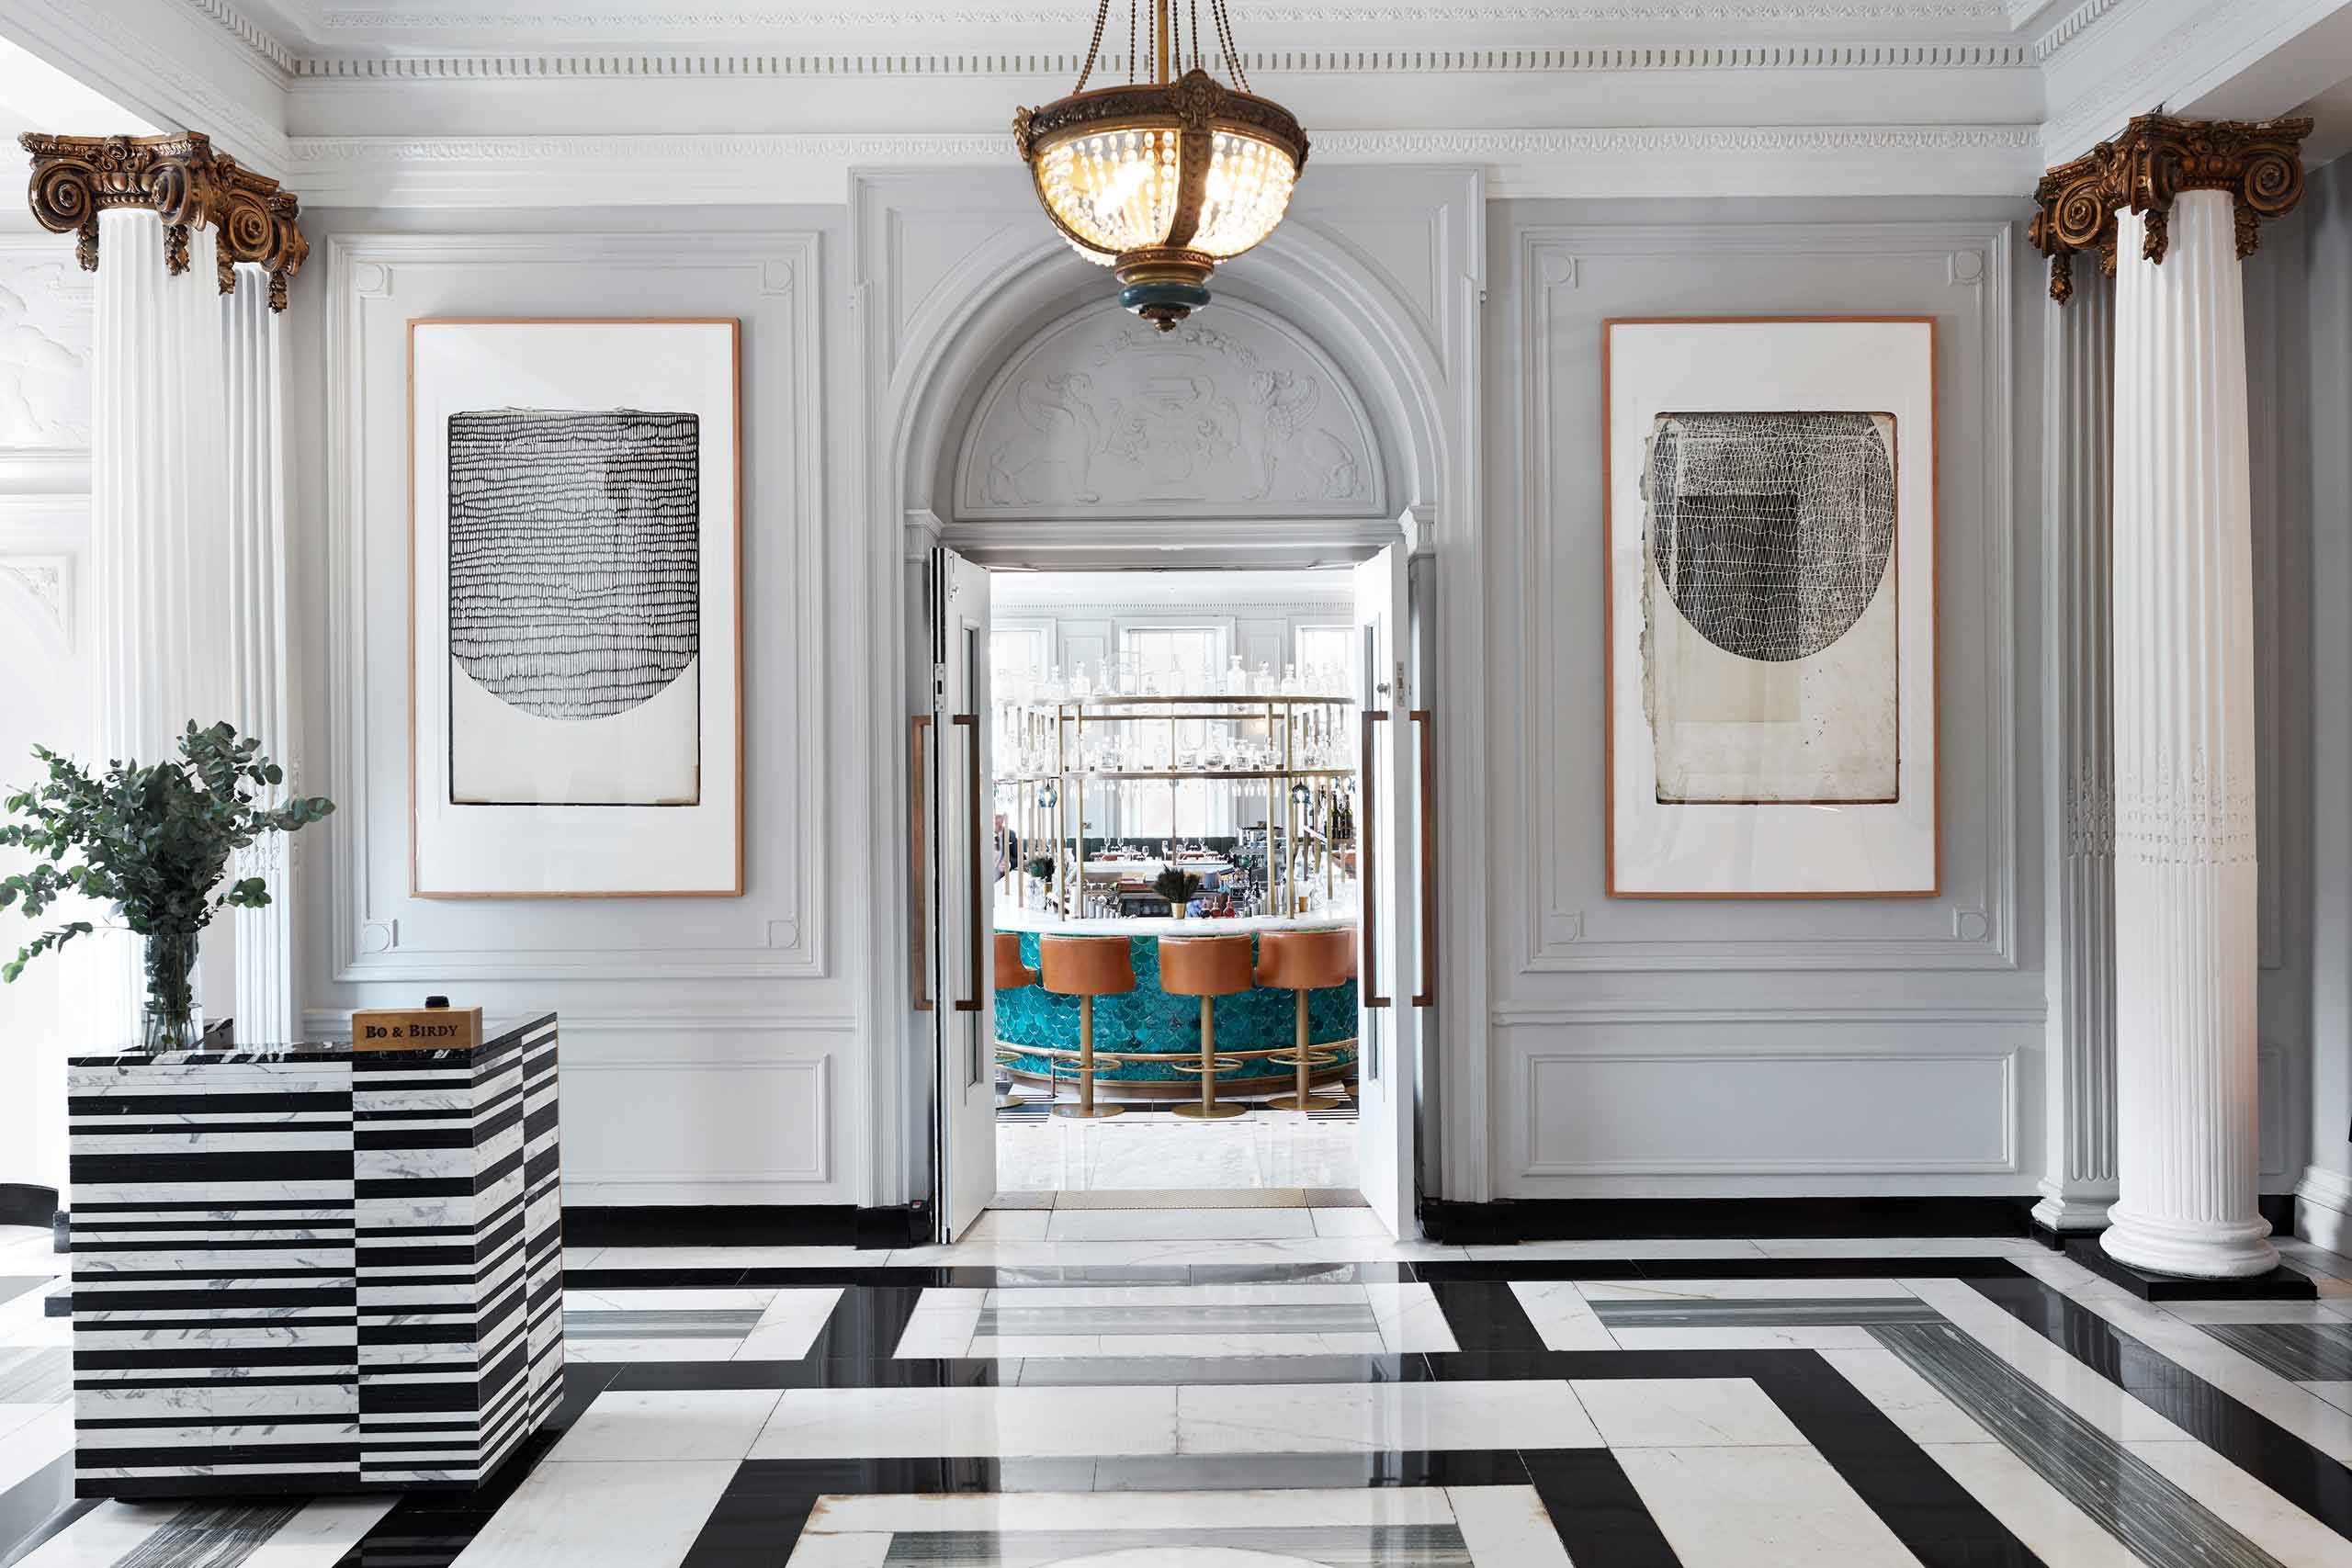 A foyer with a monochromatic tiled floor leading to a bar at Kimpton Blythswood Square, Glasgow, Scotland.